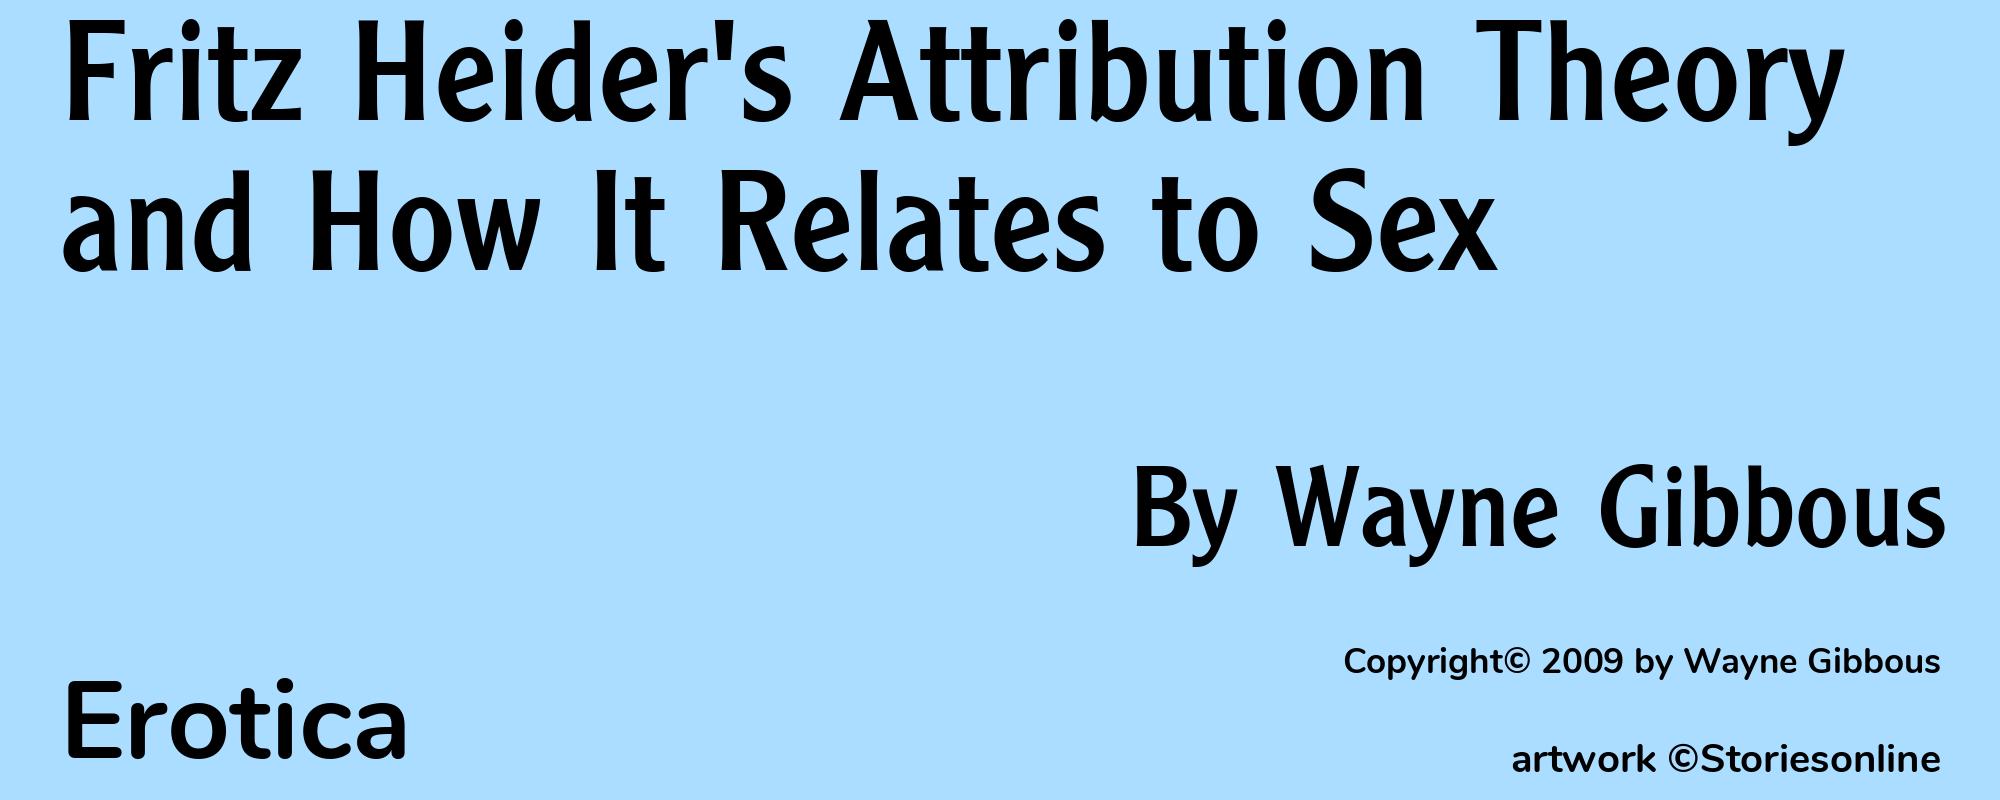 Fritz Heider's Attribution Theory and How It Relates to Sex - Cover